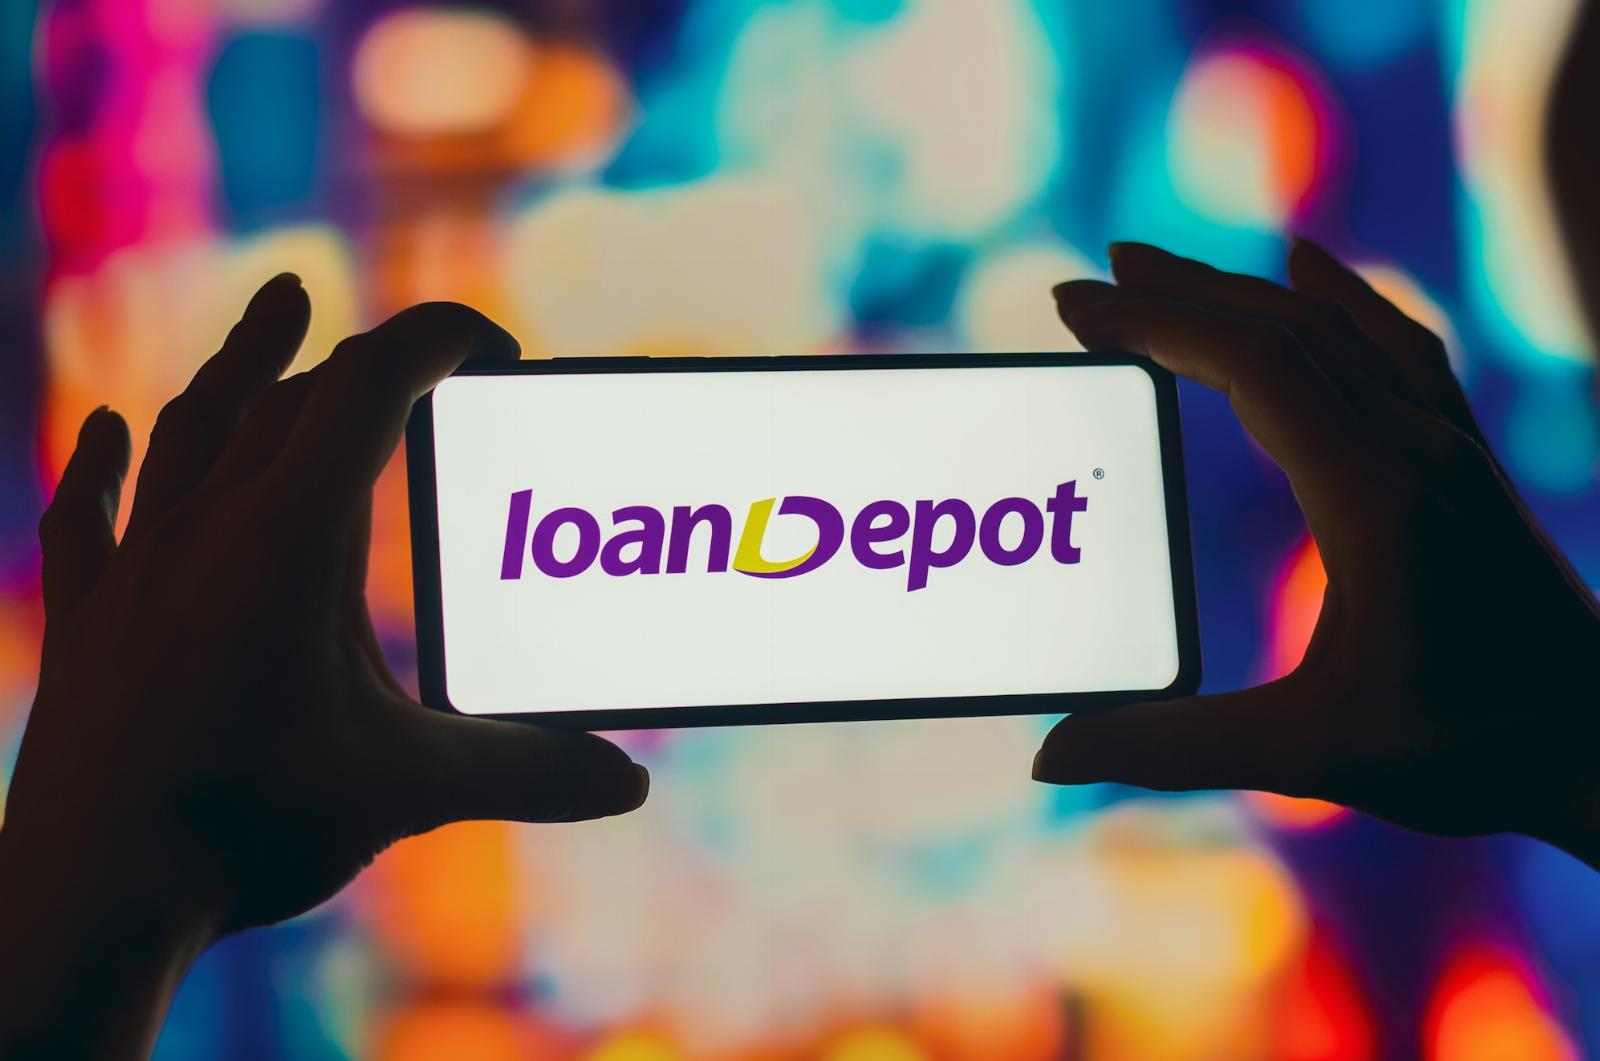 LoanDepot outage drags into second week after ransomware attack